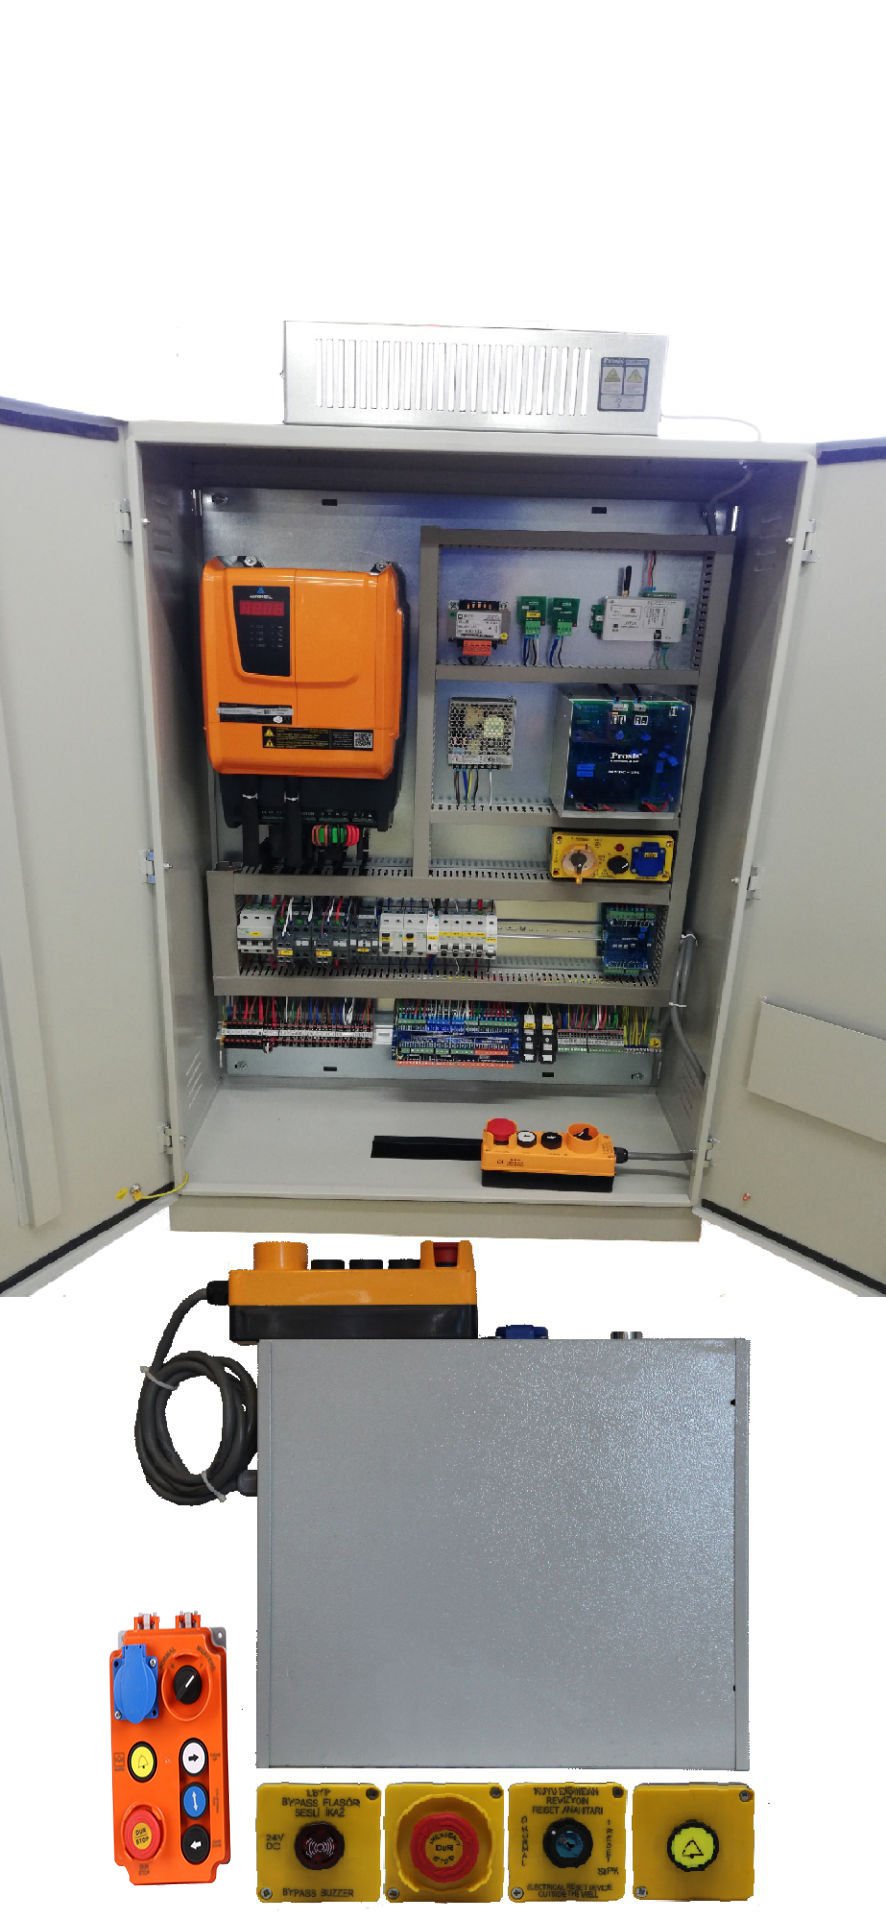 11 kW ARCODE INTEGRATED-GEARED-ASYNCHRONOUS-MR-EN81-20-BATTERY RESCUE CONTROL PANEL